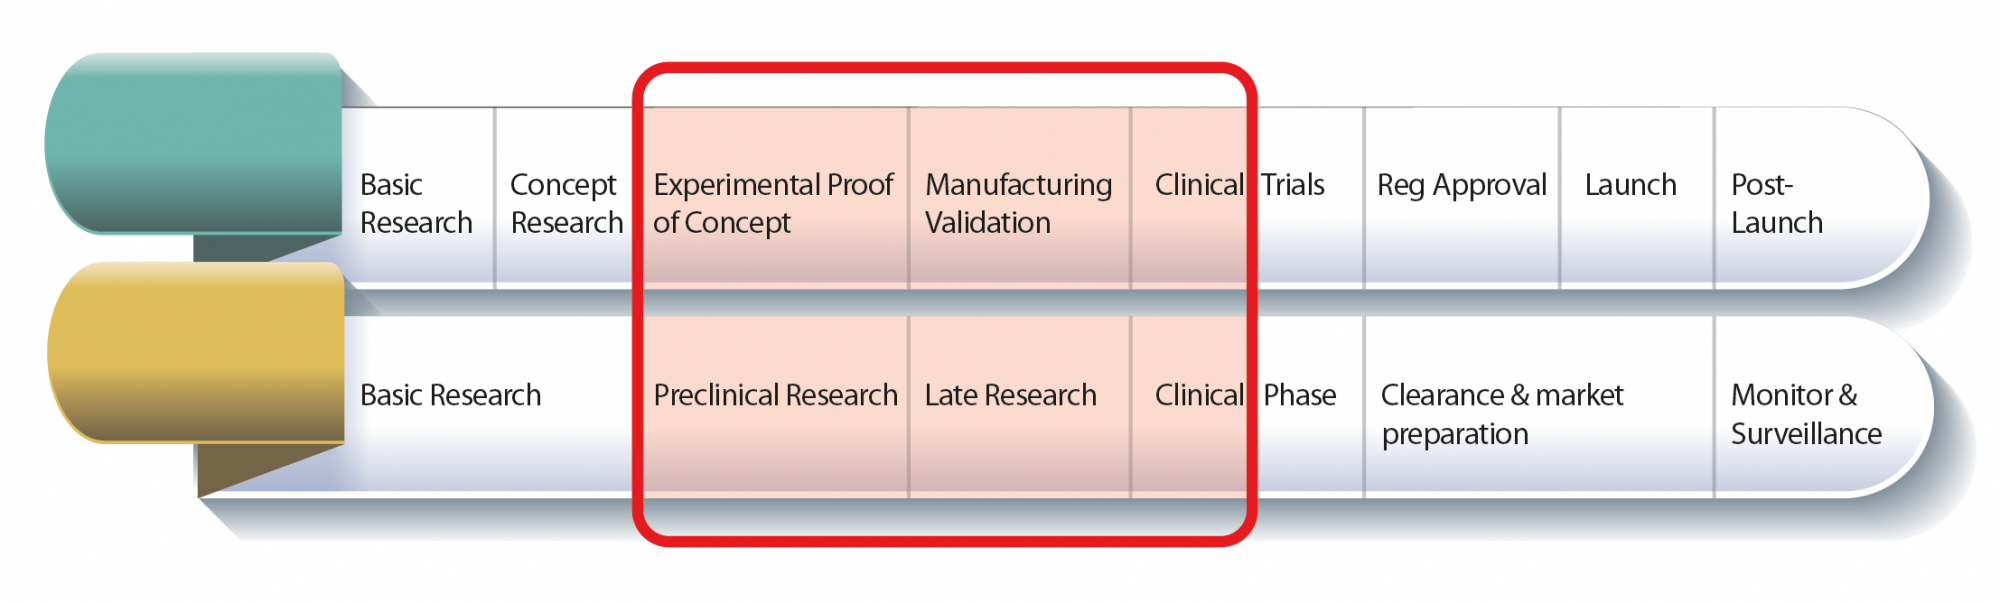 Image: the activity of the Laboratory is situated between preclinical and clinical research